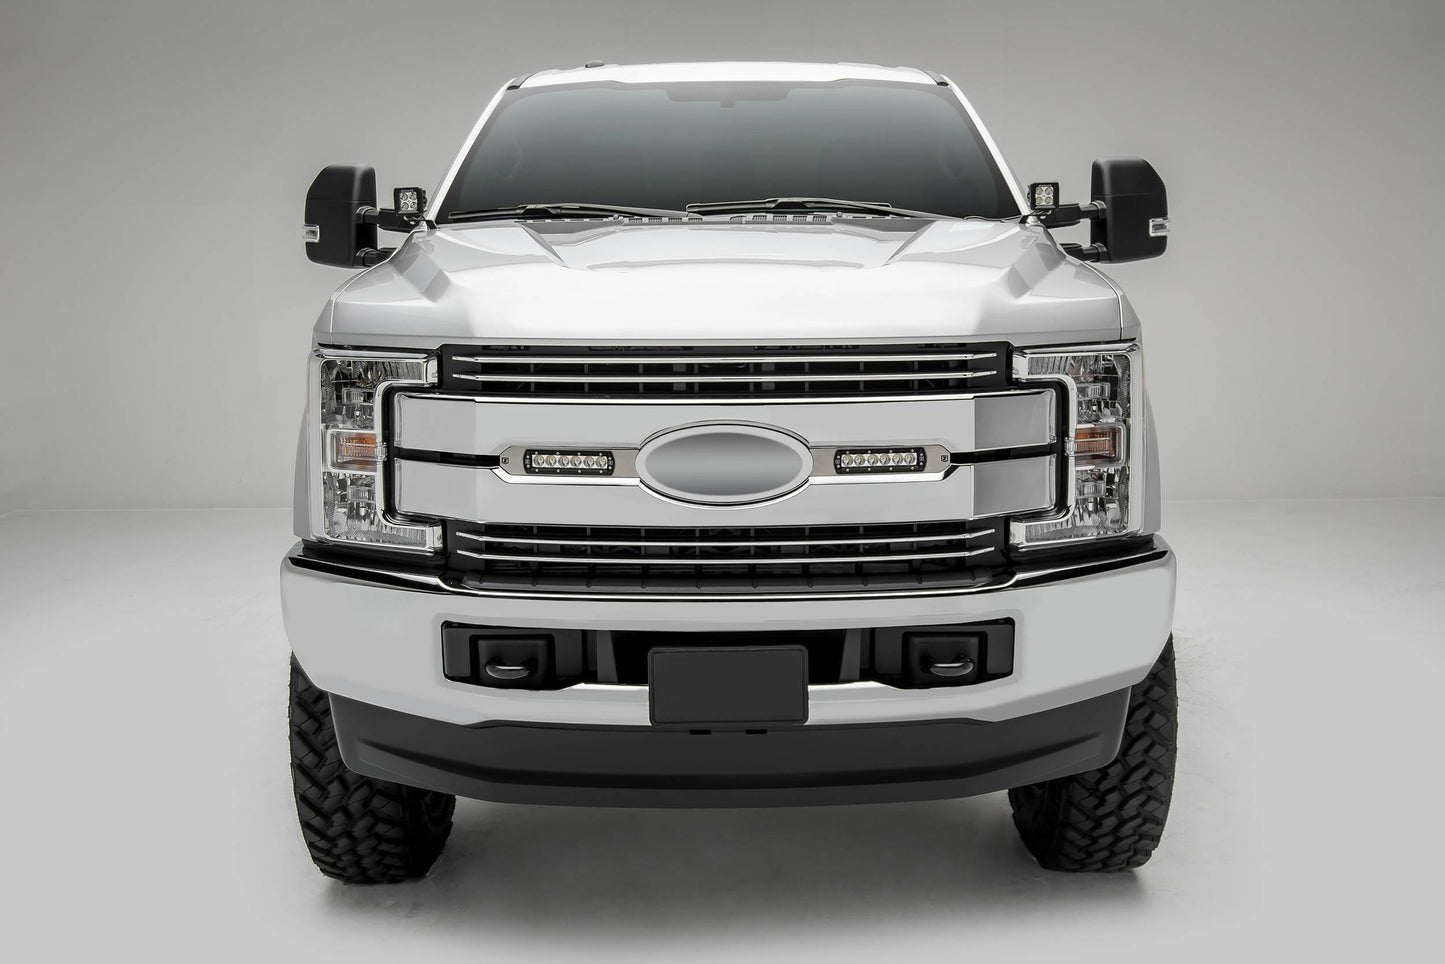 ZROADZ Z415473-KIT Brushed Stainless Steel OEM Grille LED Kit Fits 2017-2019 Ford F-250 Lariat F-250 King Ranch F-350 Lariat F-350 King Ranch F-450 Lariat F-450 King Ranch F-550 Lariat F-550 King Ranch